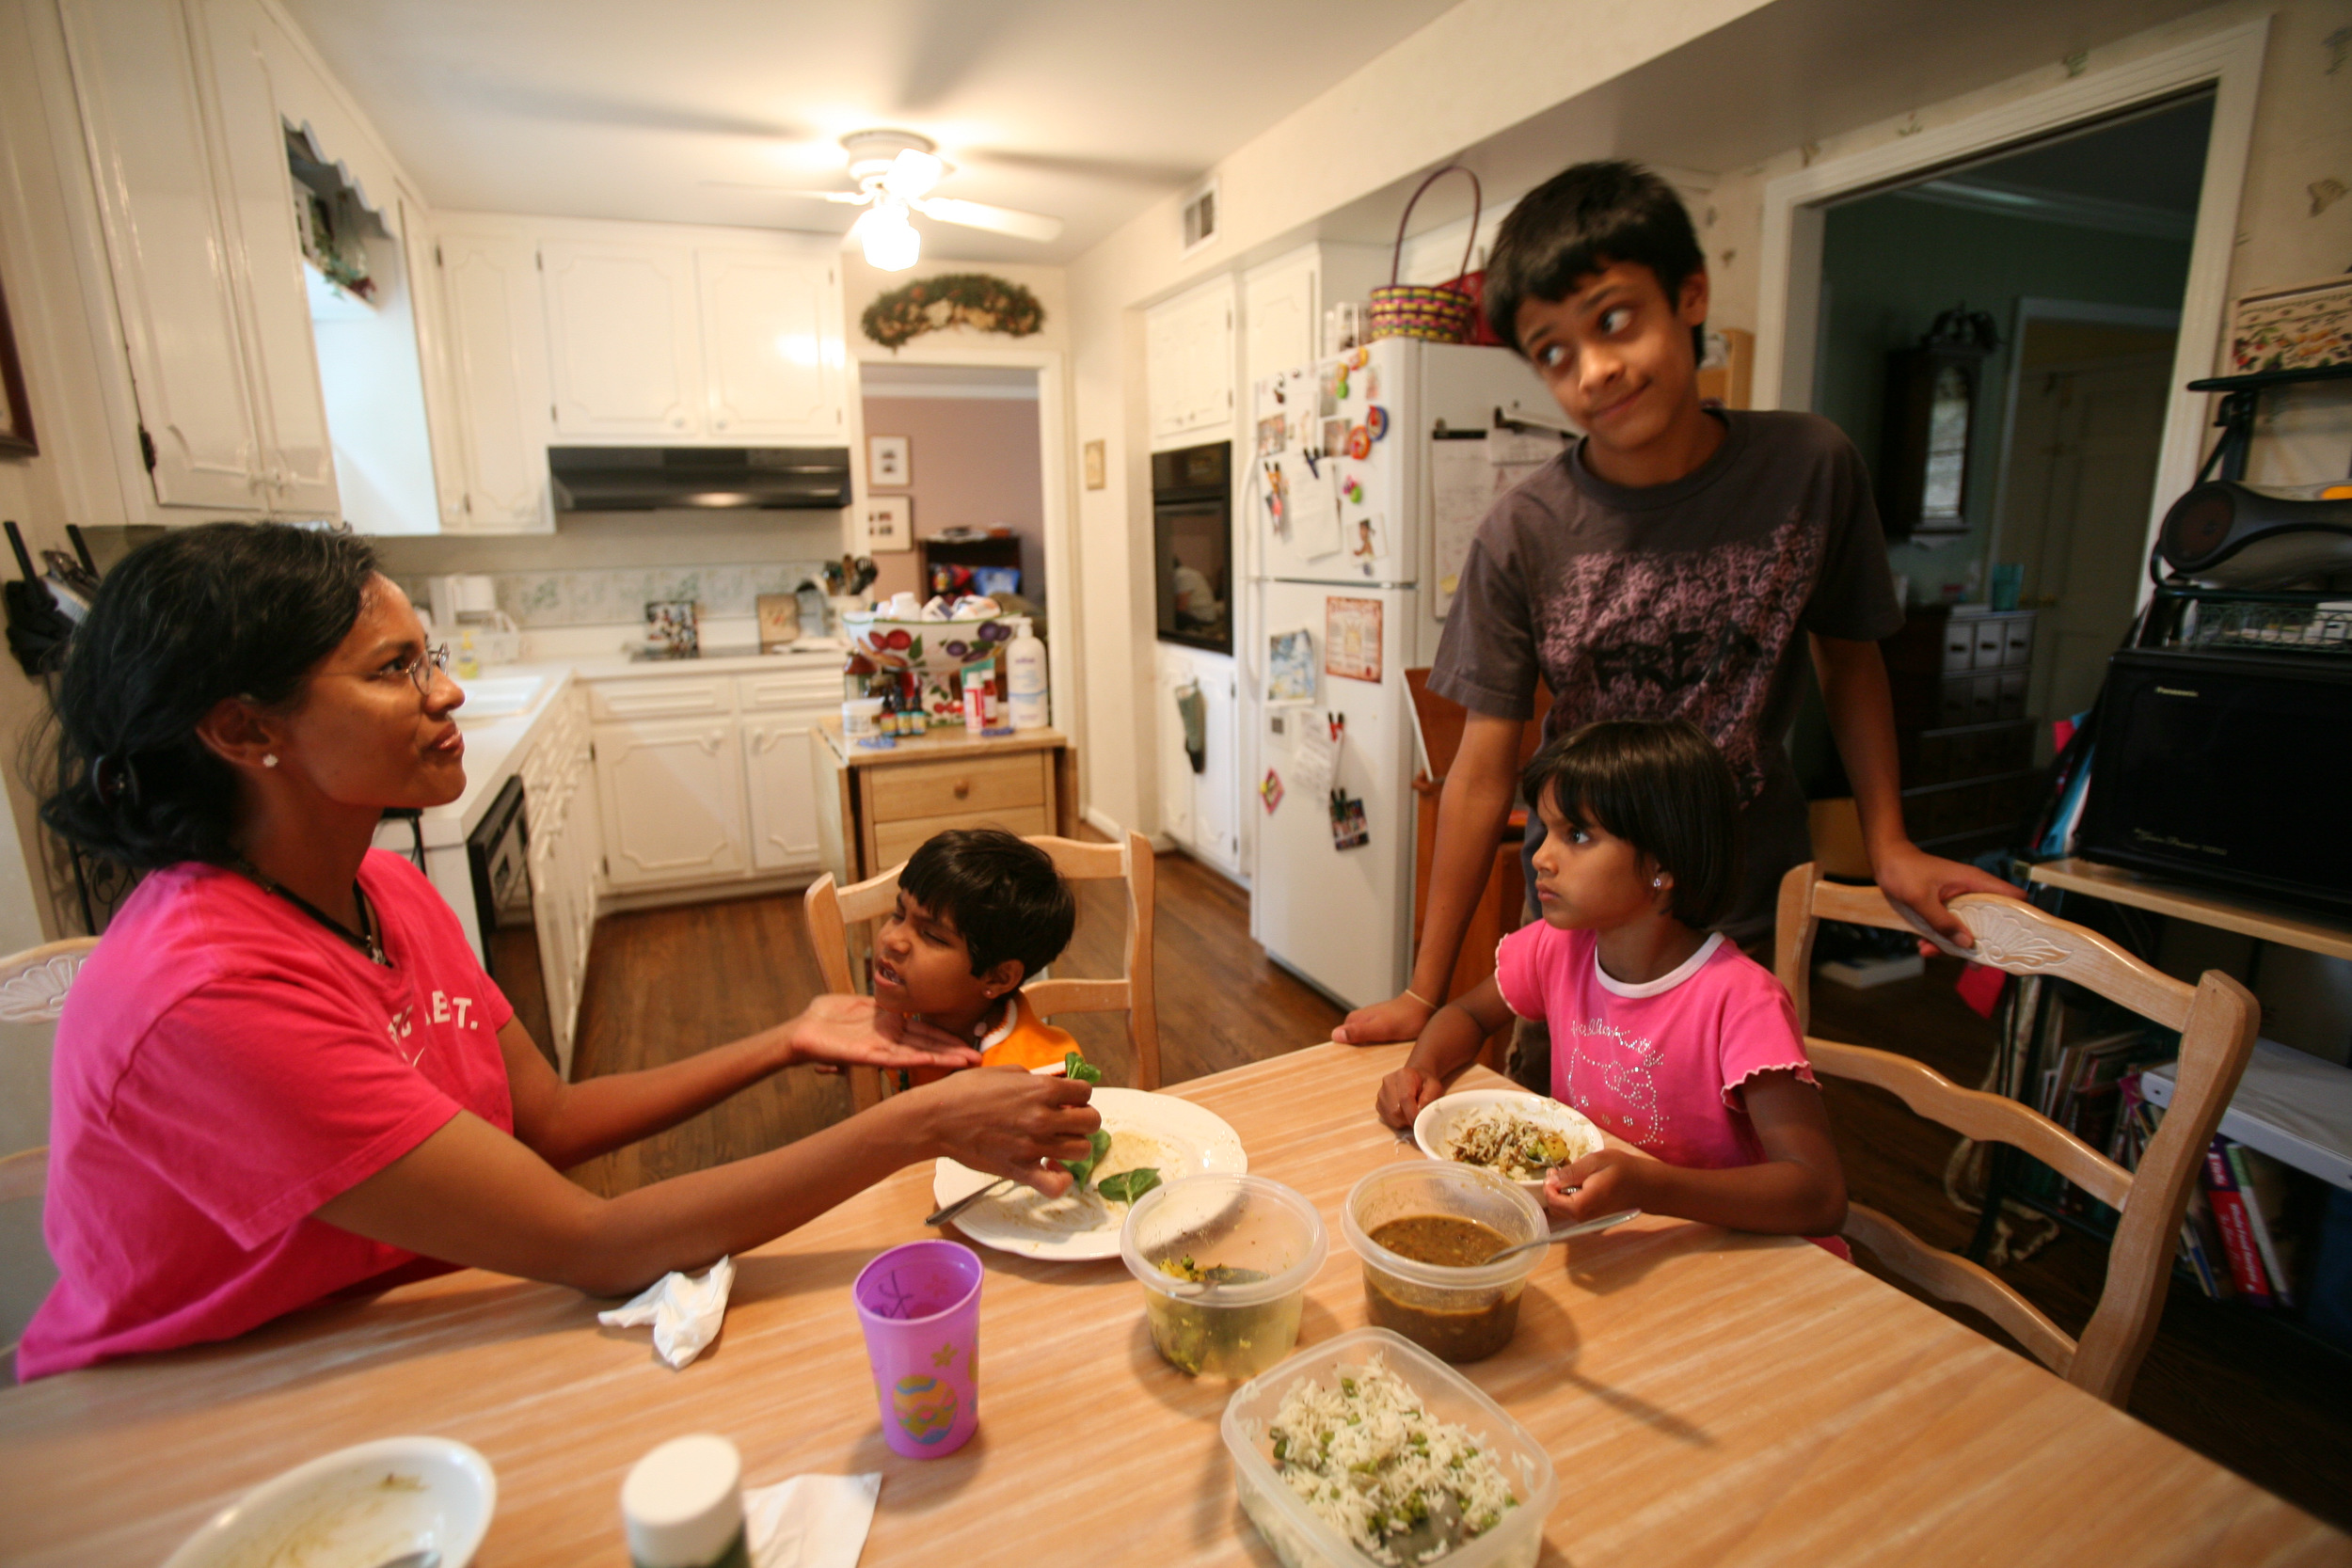  Karthi Masters, left, feeds Kajal at the dinner table with her children Davey, and Elijah in Franklin, Tenn., Wednesday, May 30, 2007. The Masters, who want to adopt Kajal, have already adopted Davey from India several years ago. 